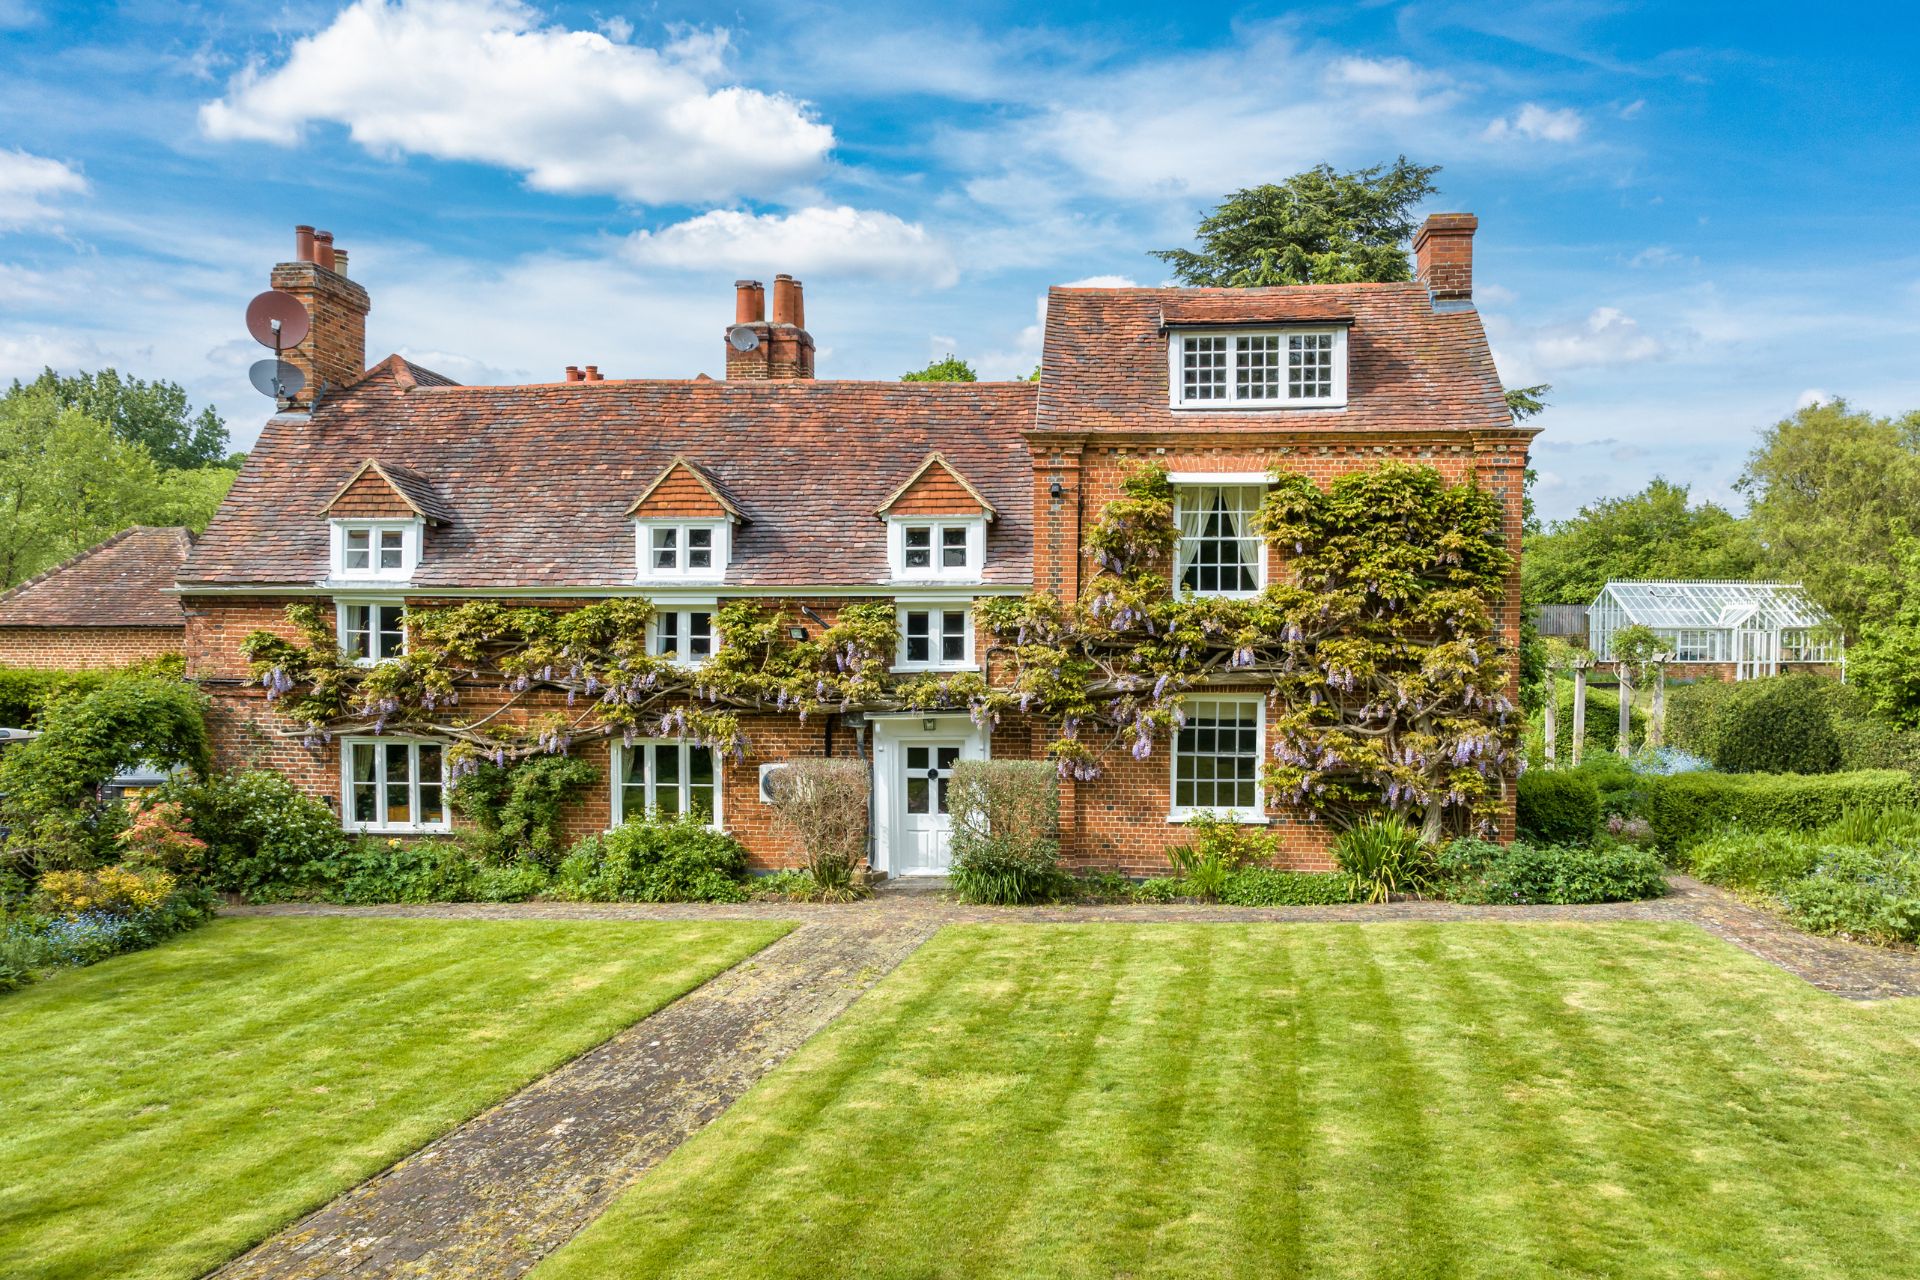 Red brick Surrey home with wisteria-clad facade and a front lawn.